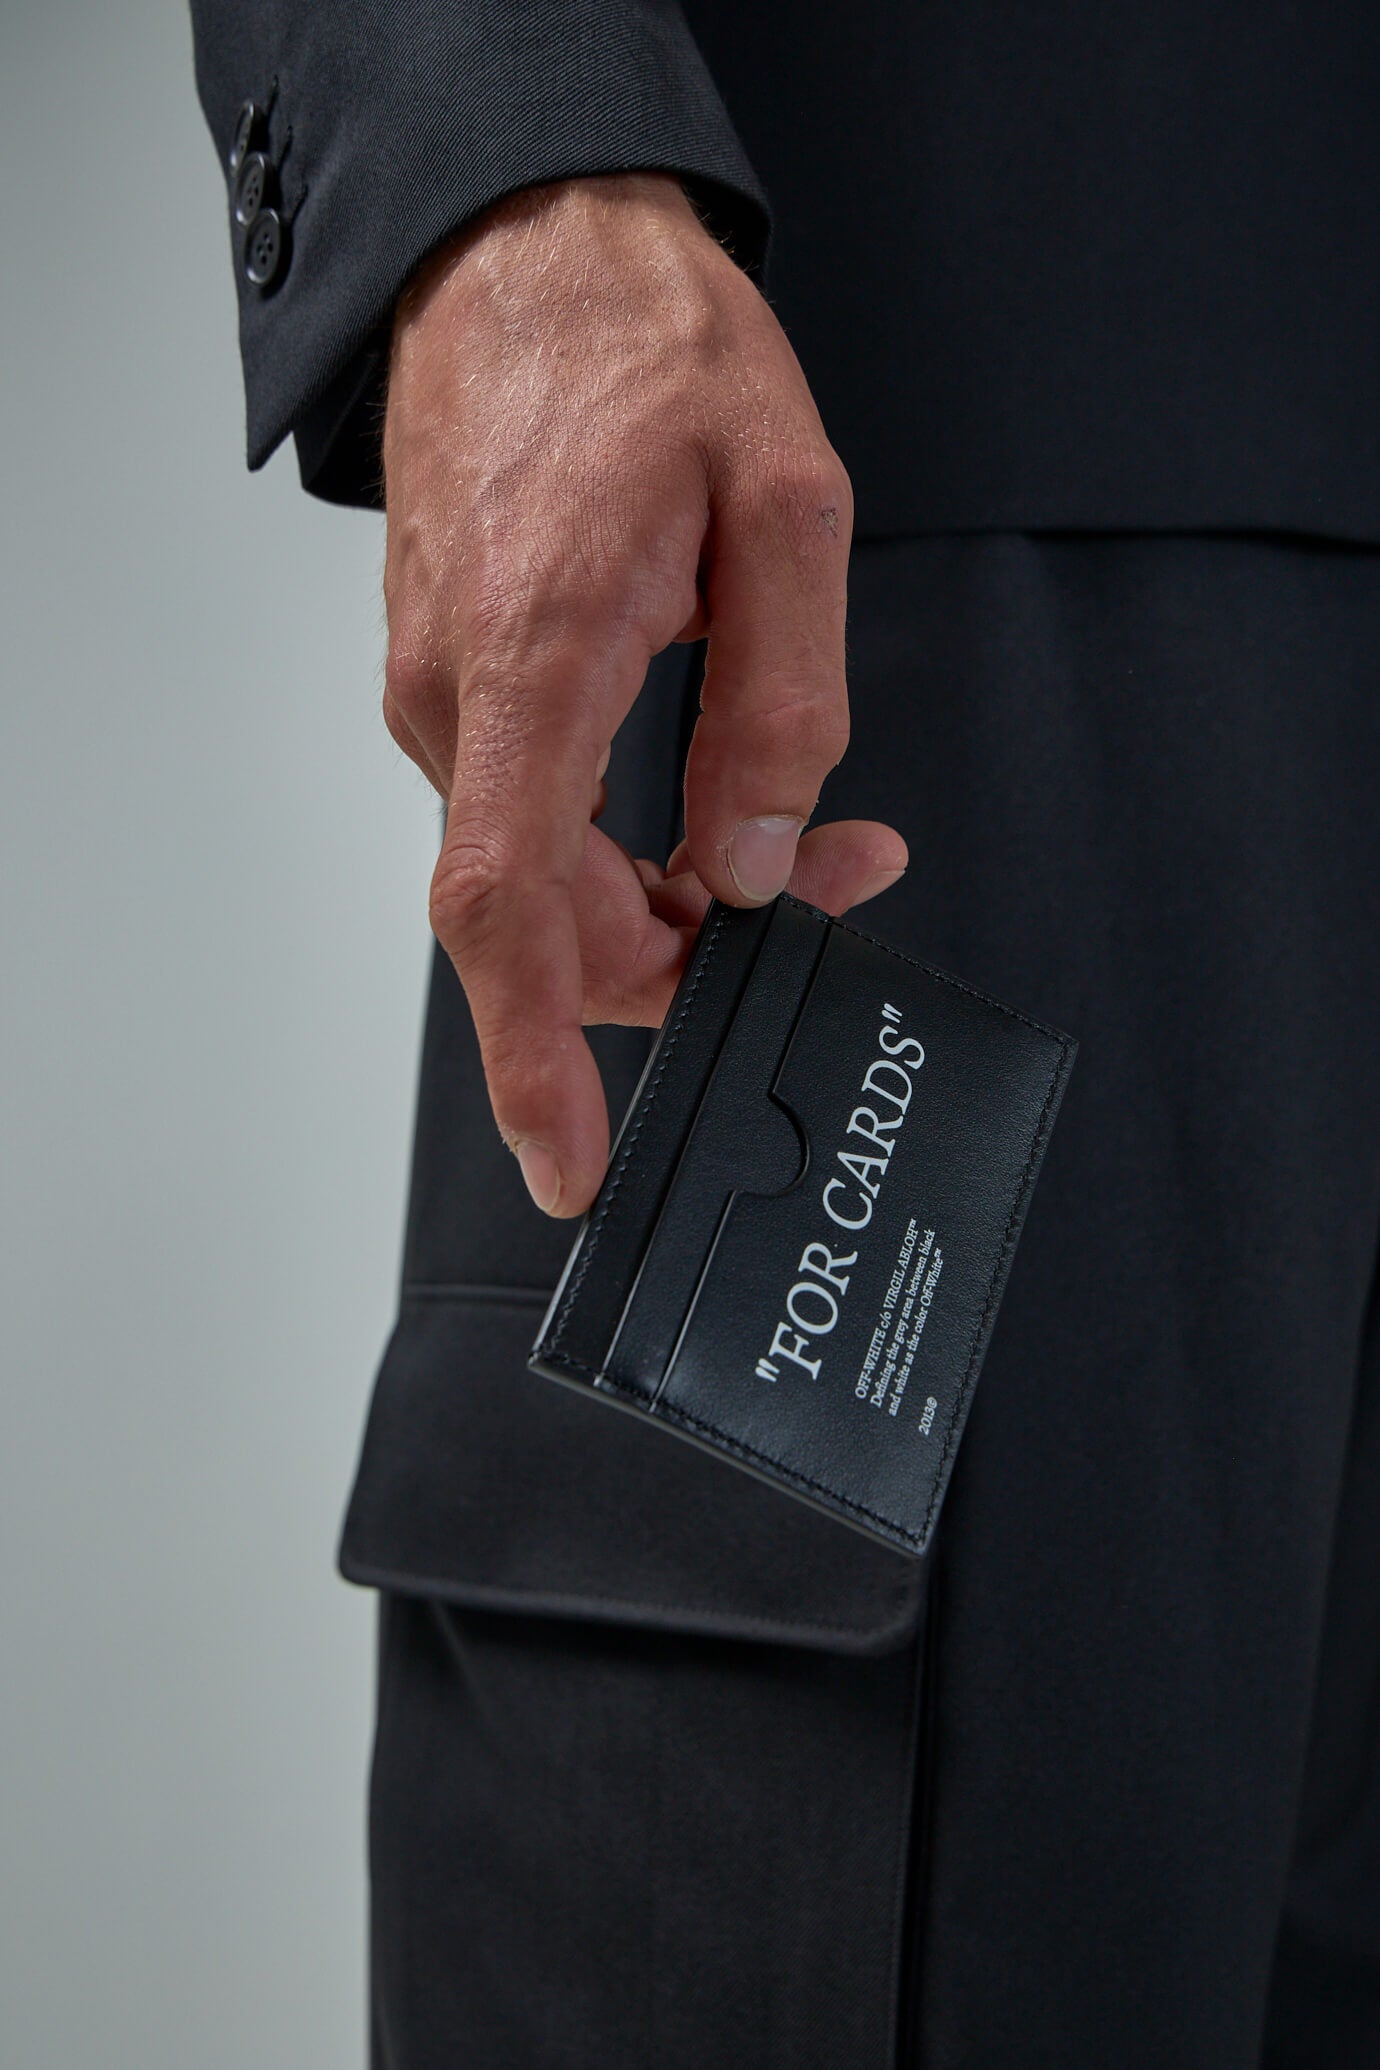 Off-White Black Quote Bookish Zipped Card Holder